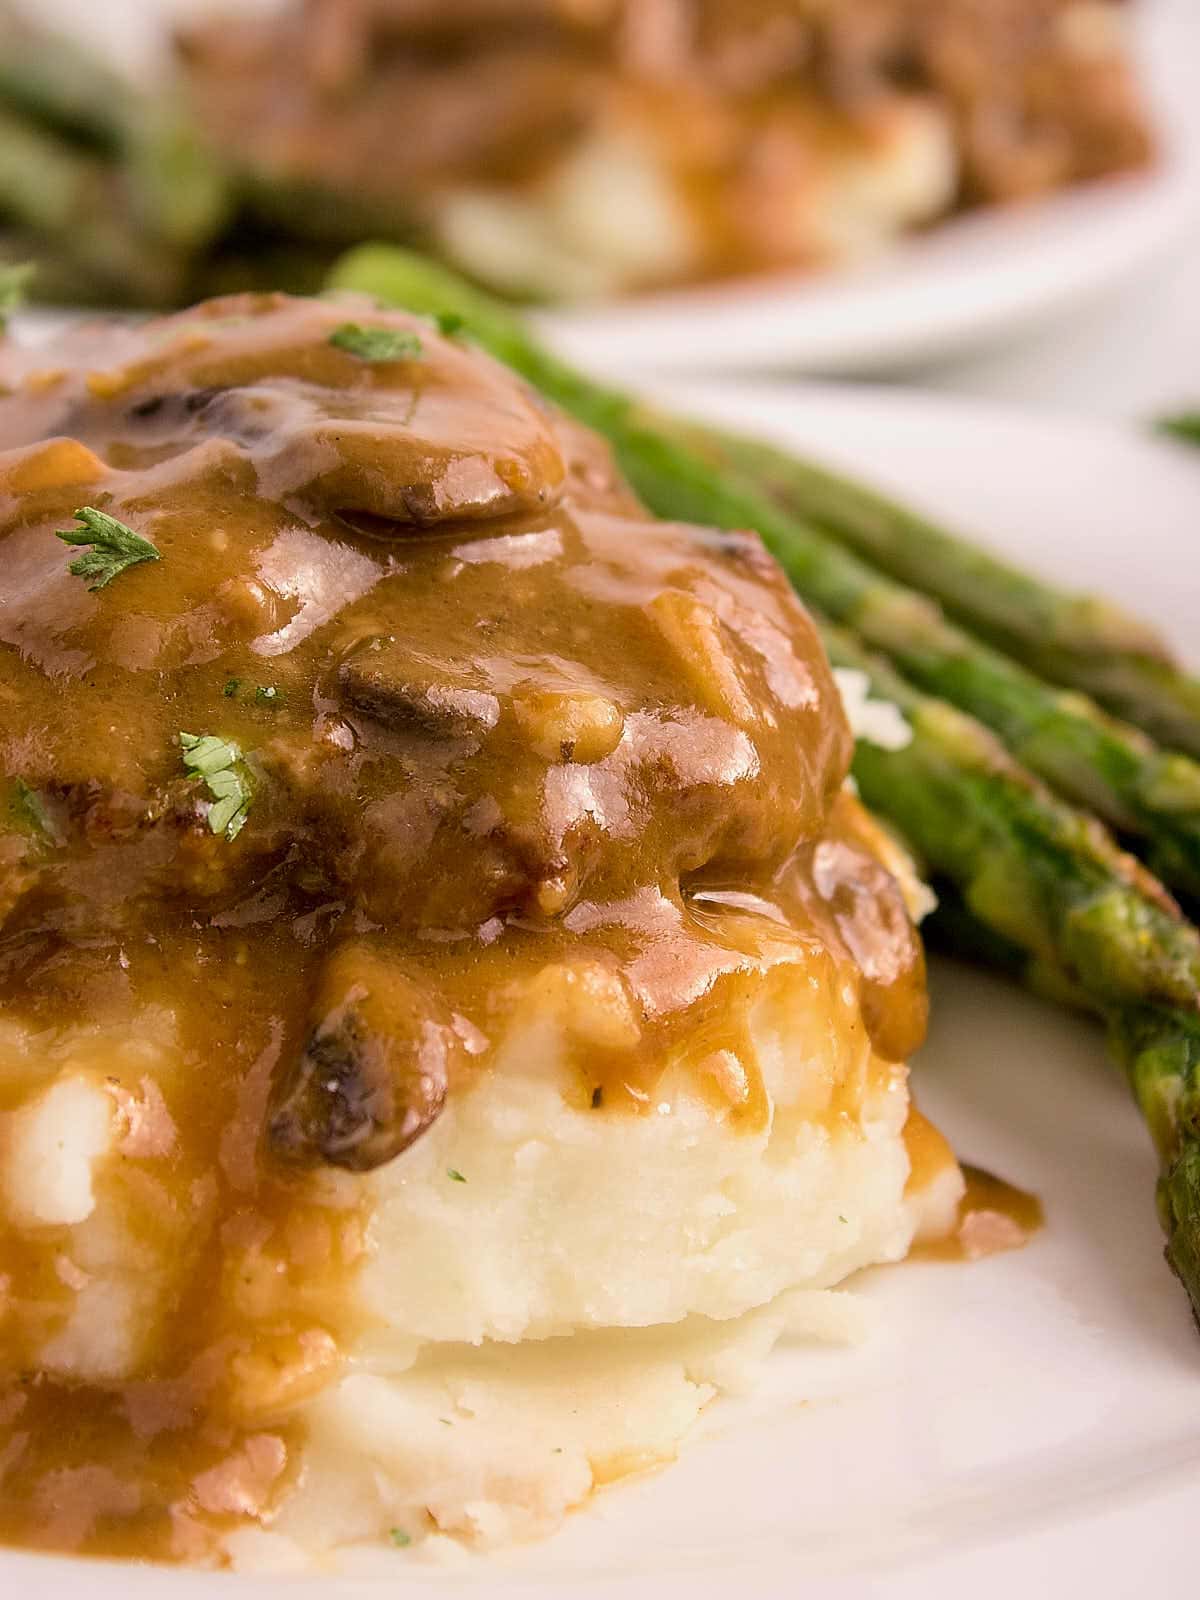 Slow Cooker Salisbury Steak served over mashed potatoes with green asparagus on a white plate.